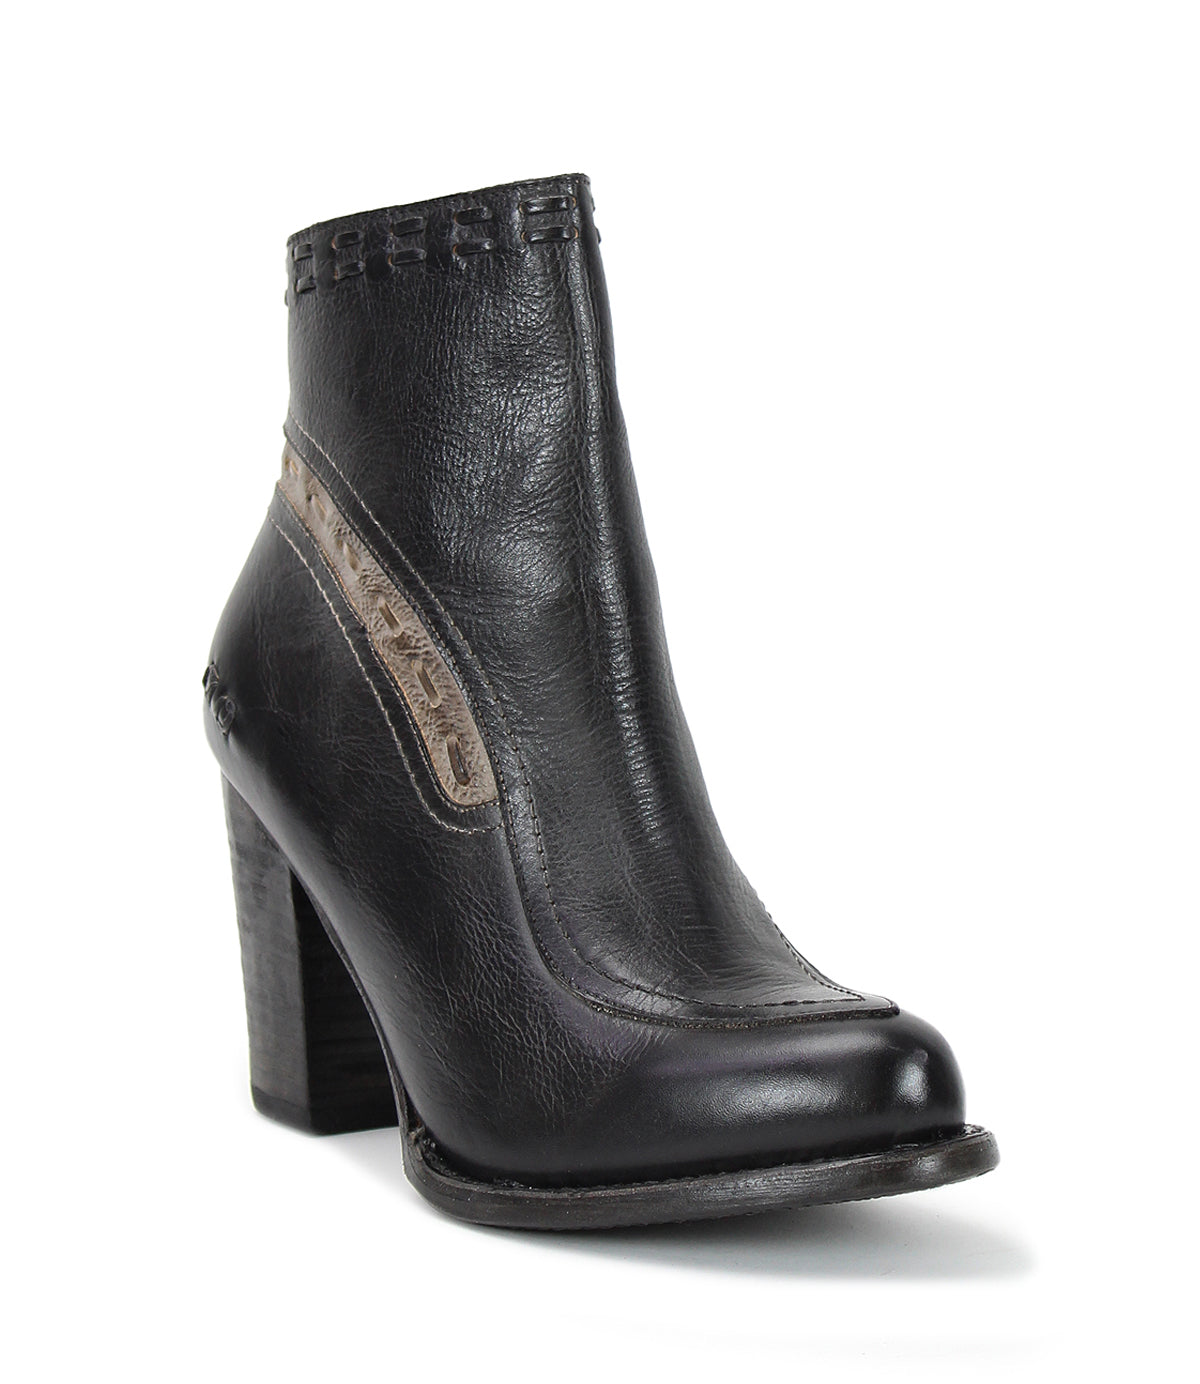 A black leather ankle boot for women called Yuno by Bed Stu.